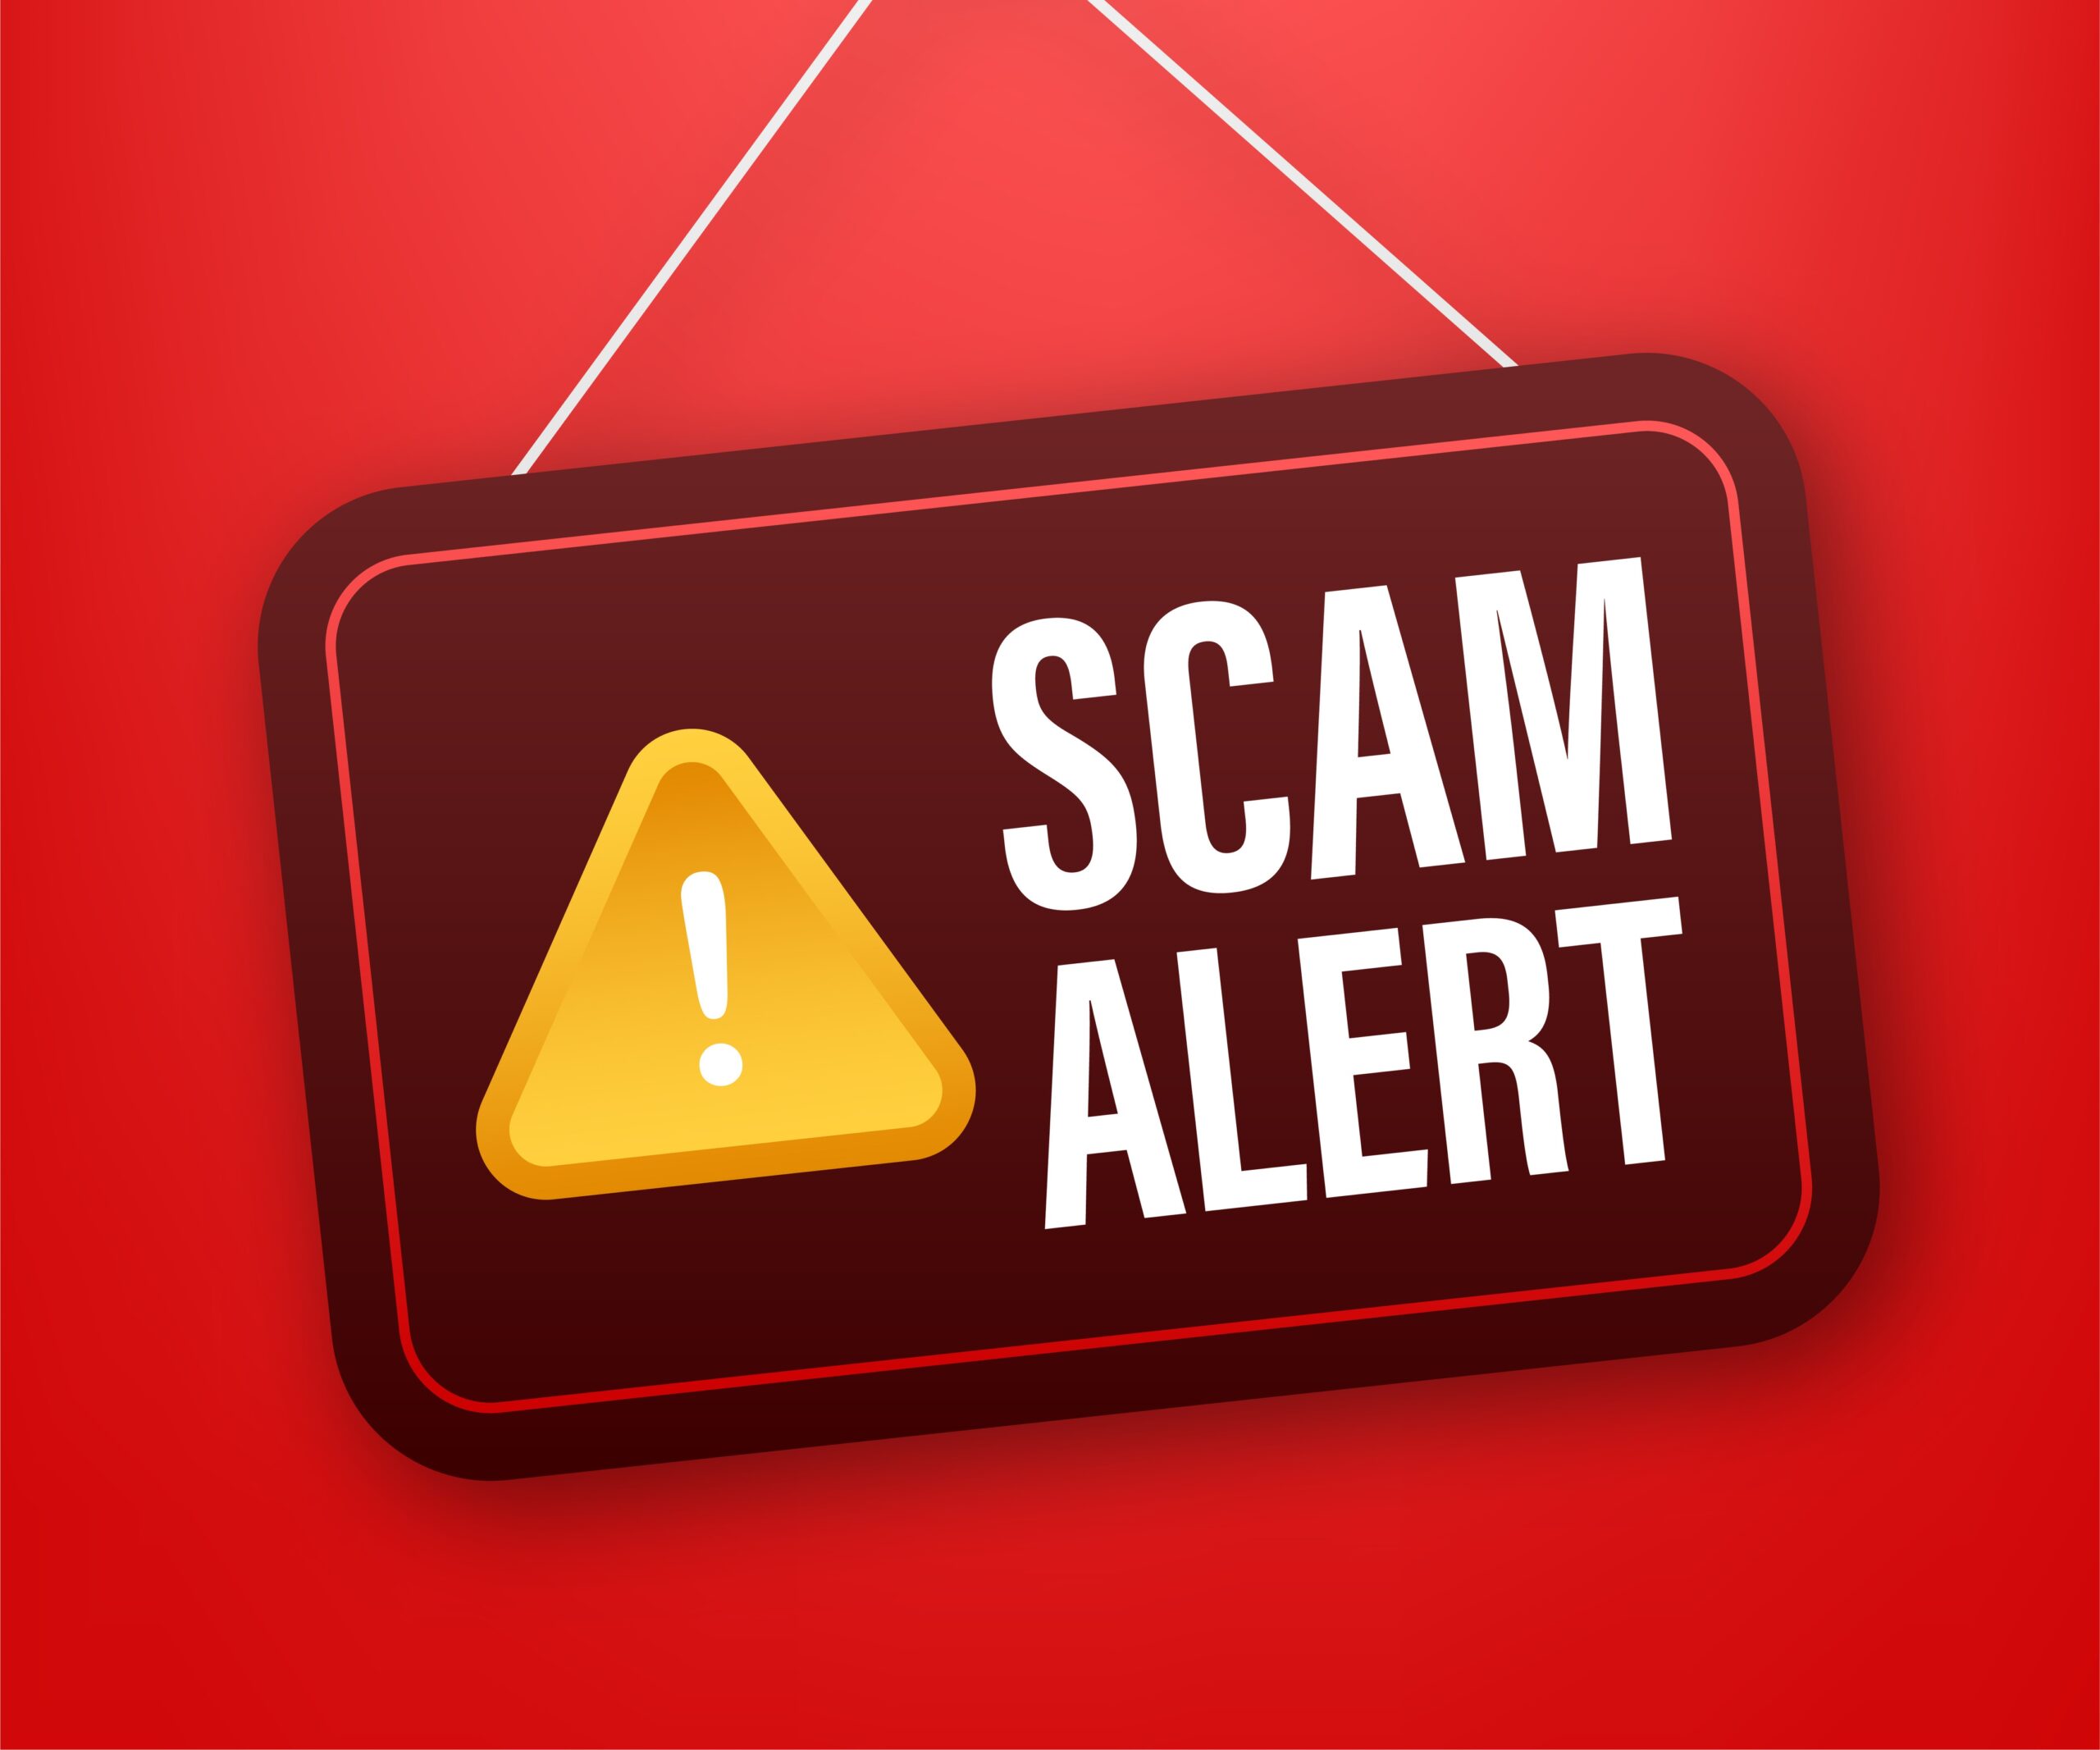 Featured image for “Scam Alert”